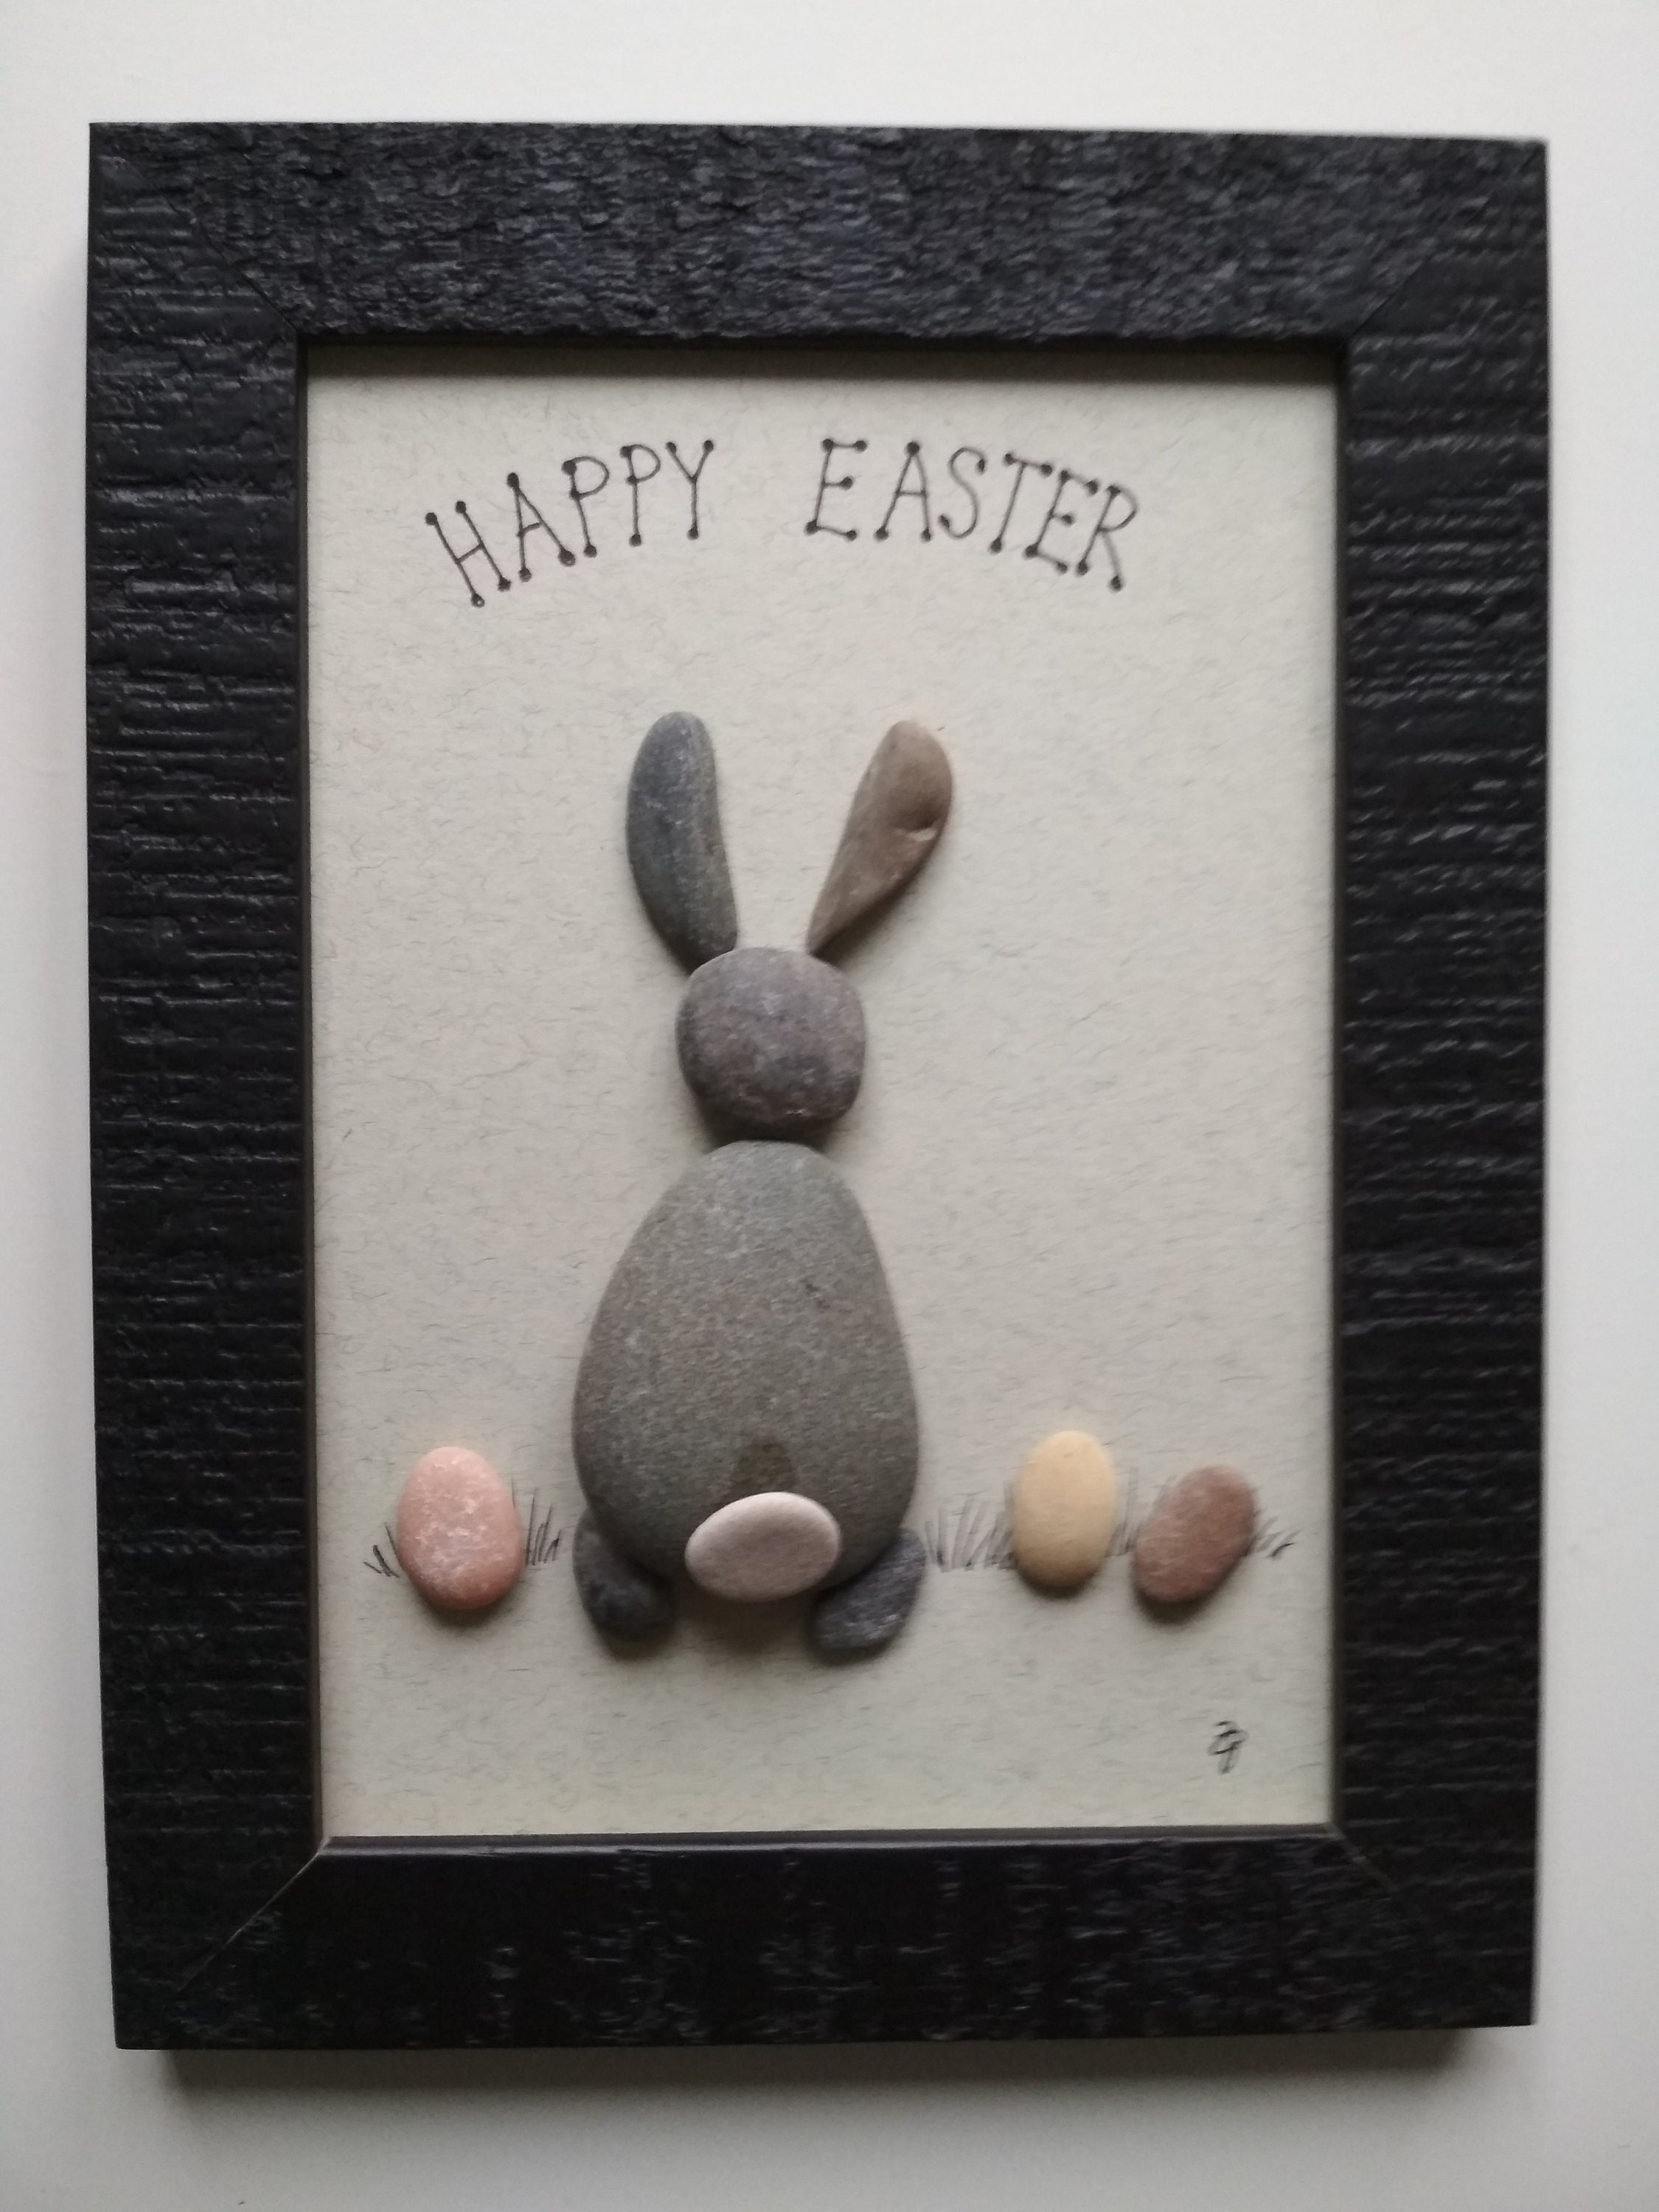 Rabbits Framed Happy Easter Wall Hanging